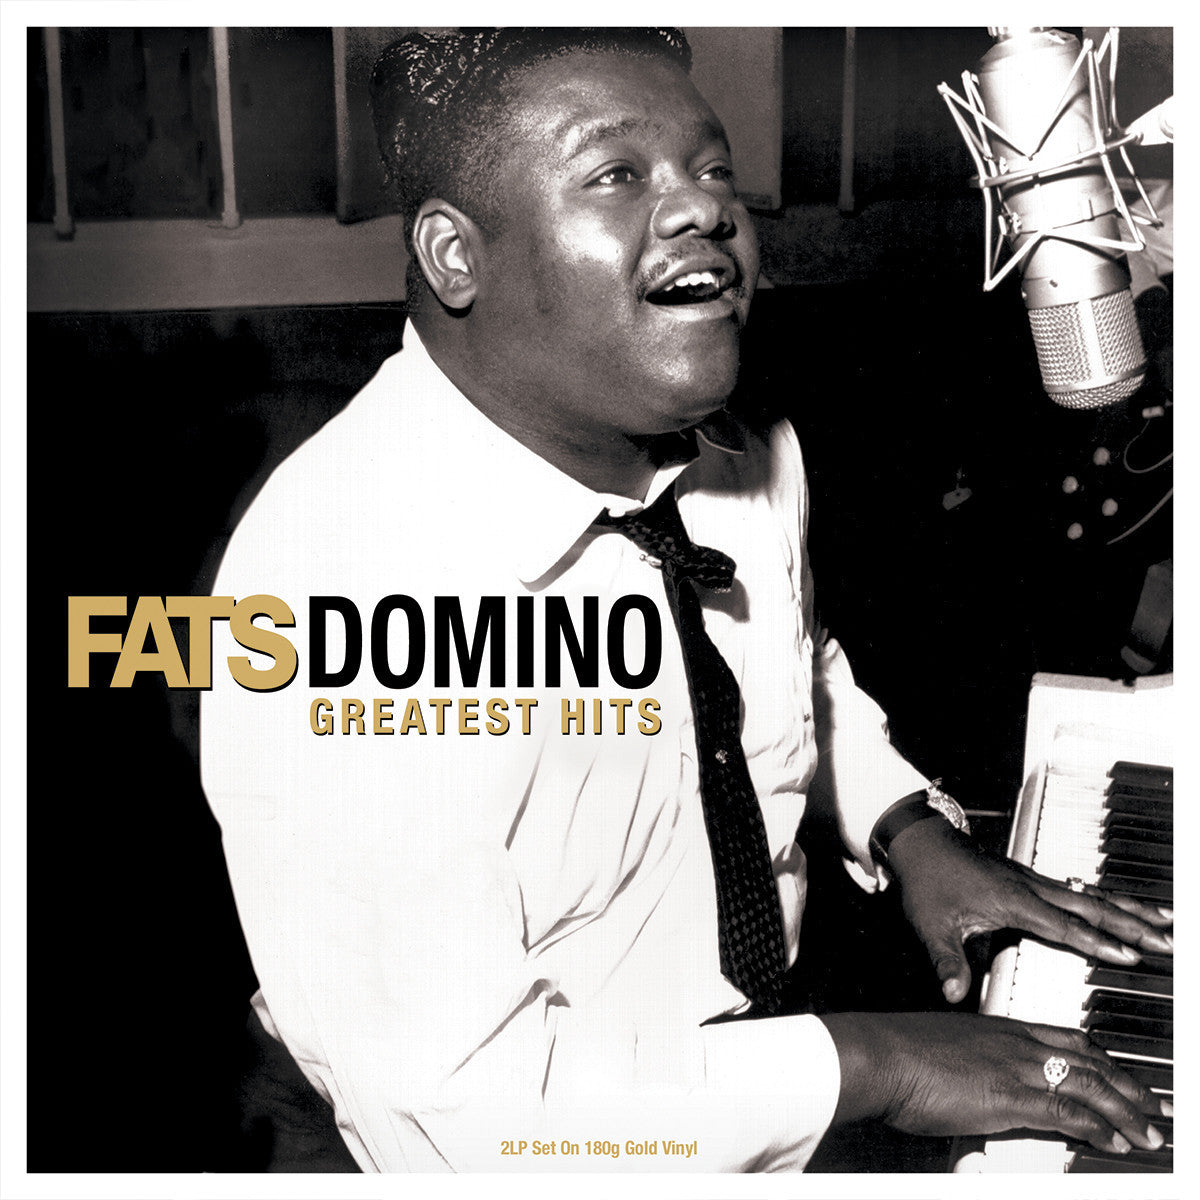 Fats Domino Greatest Hits 2 x GOLD VINYL LP SET (NOT NOW)